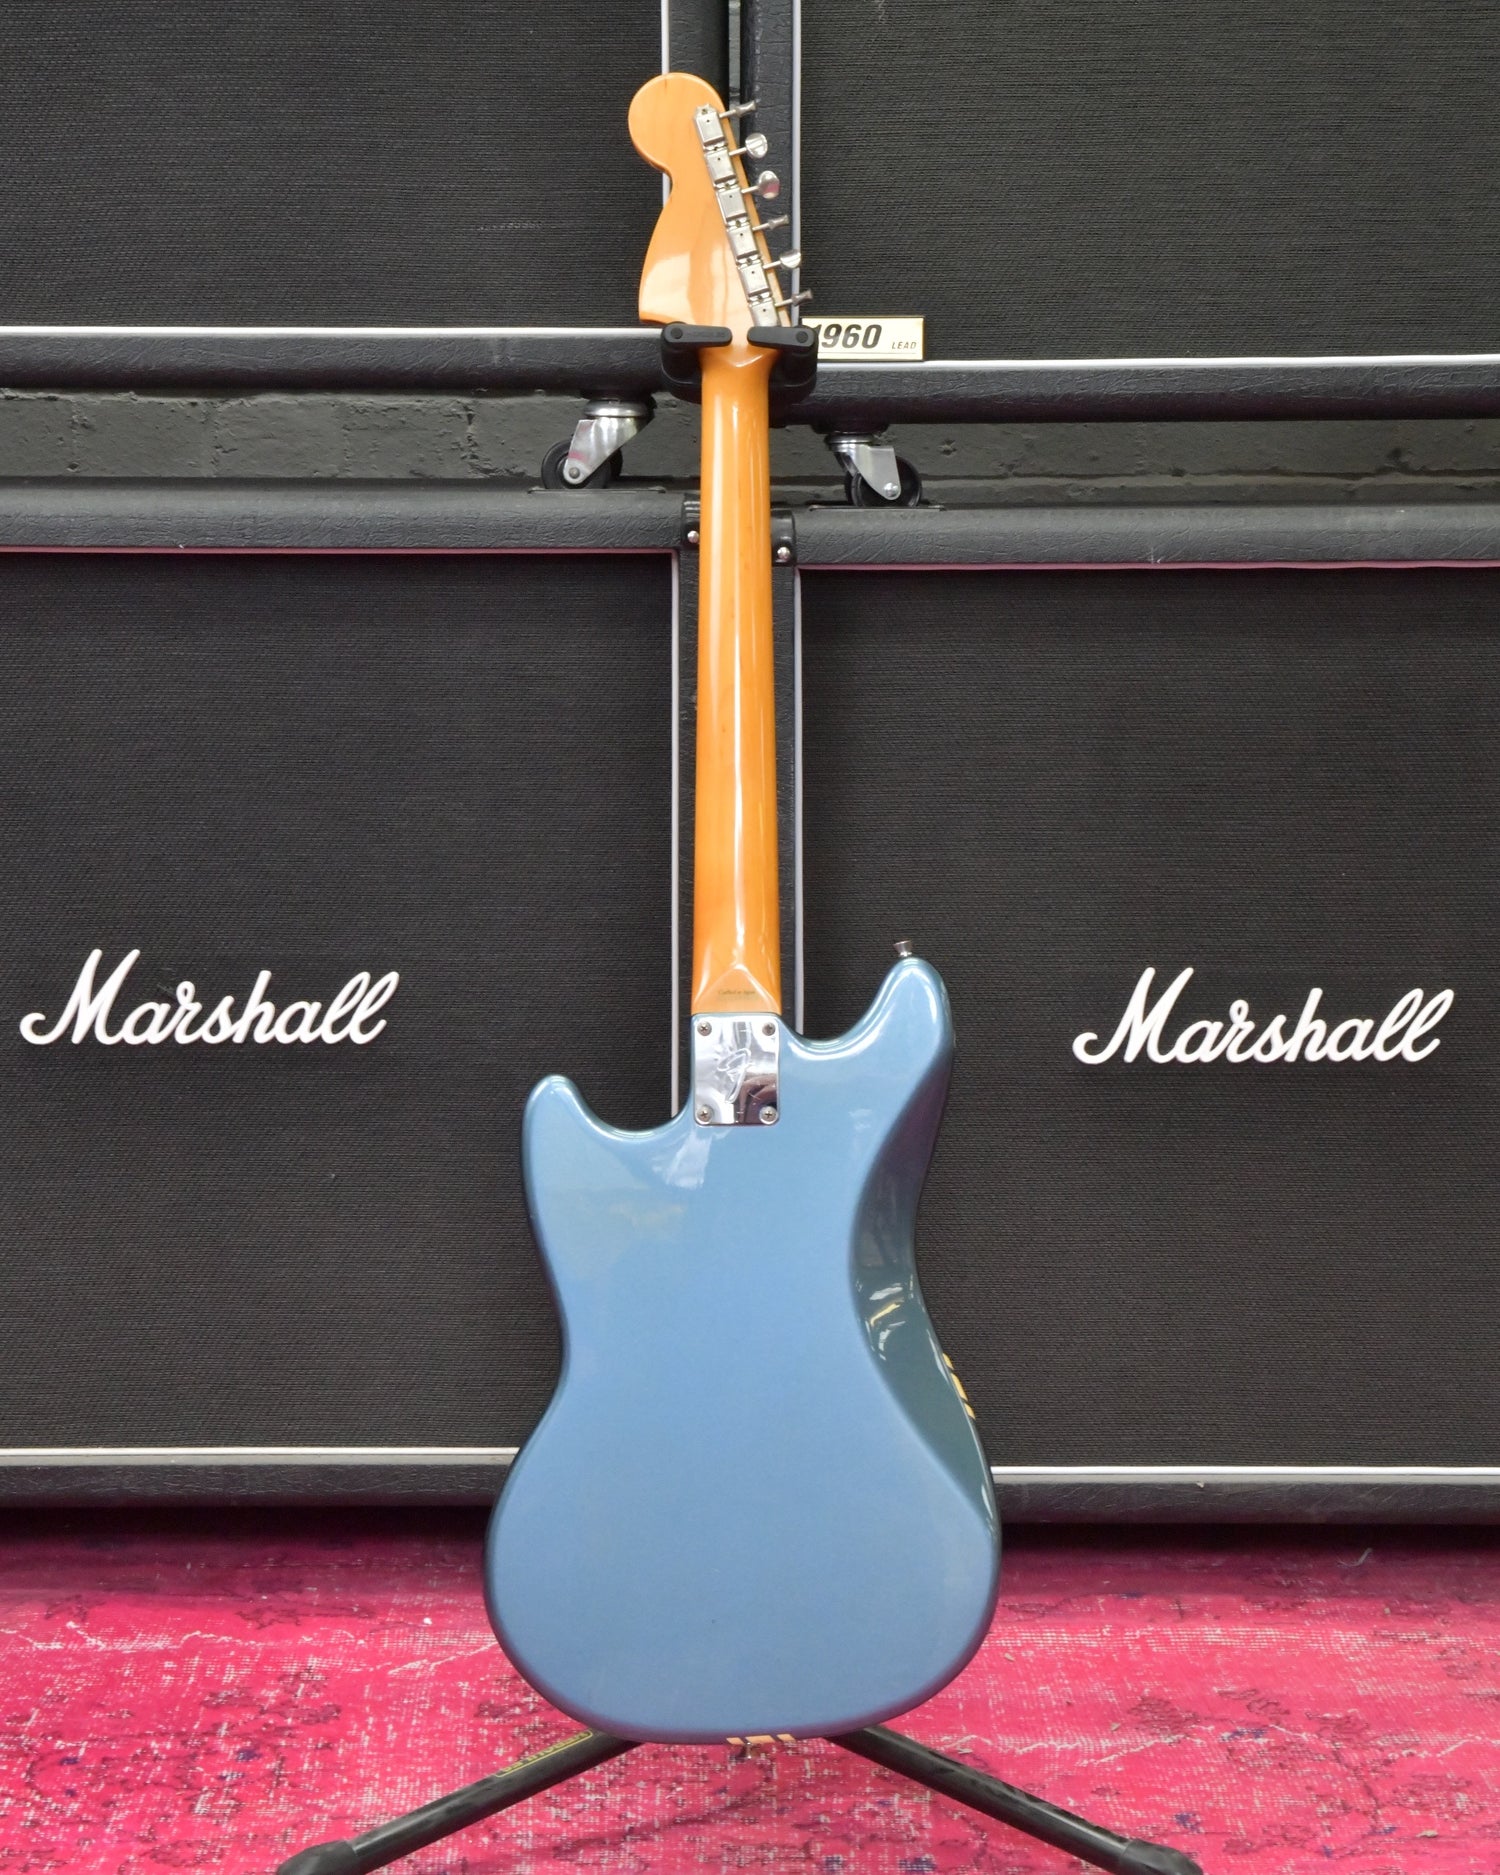 Fender Mustang HS Competition Mustang Old Lake Placid Blue CIJ 2002